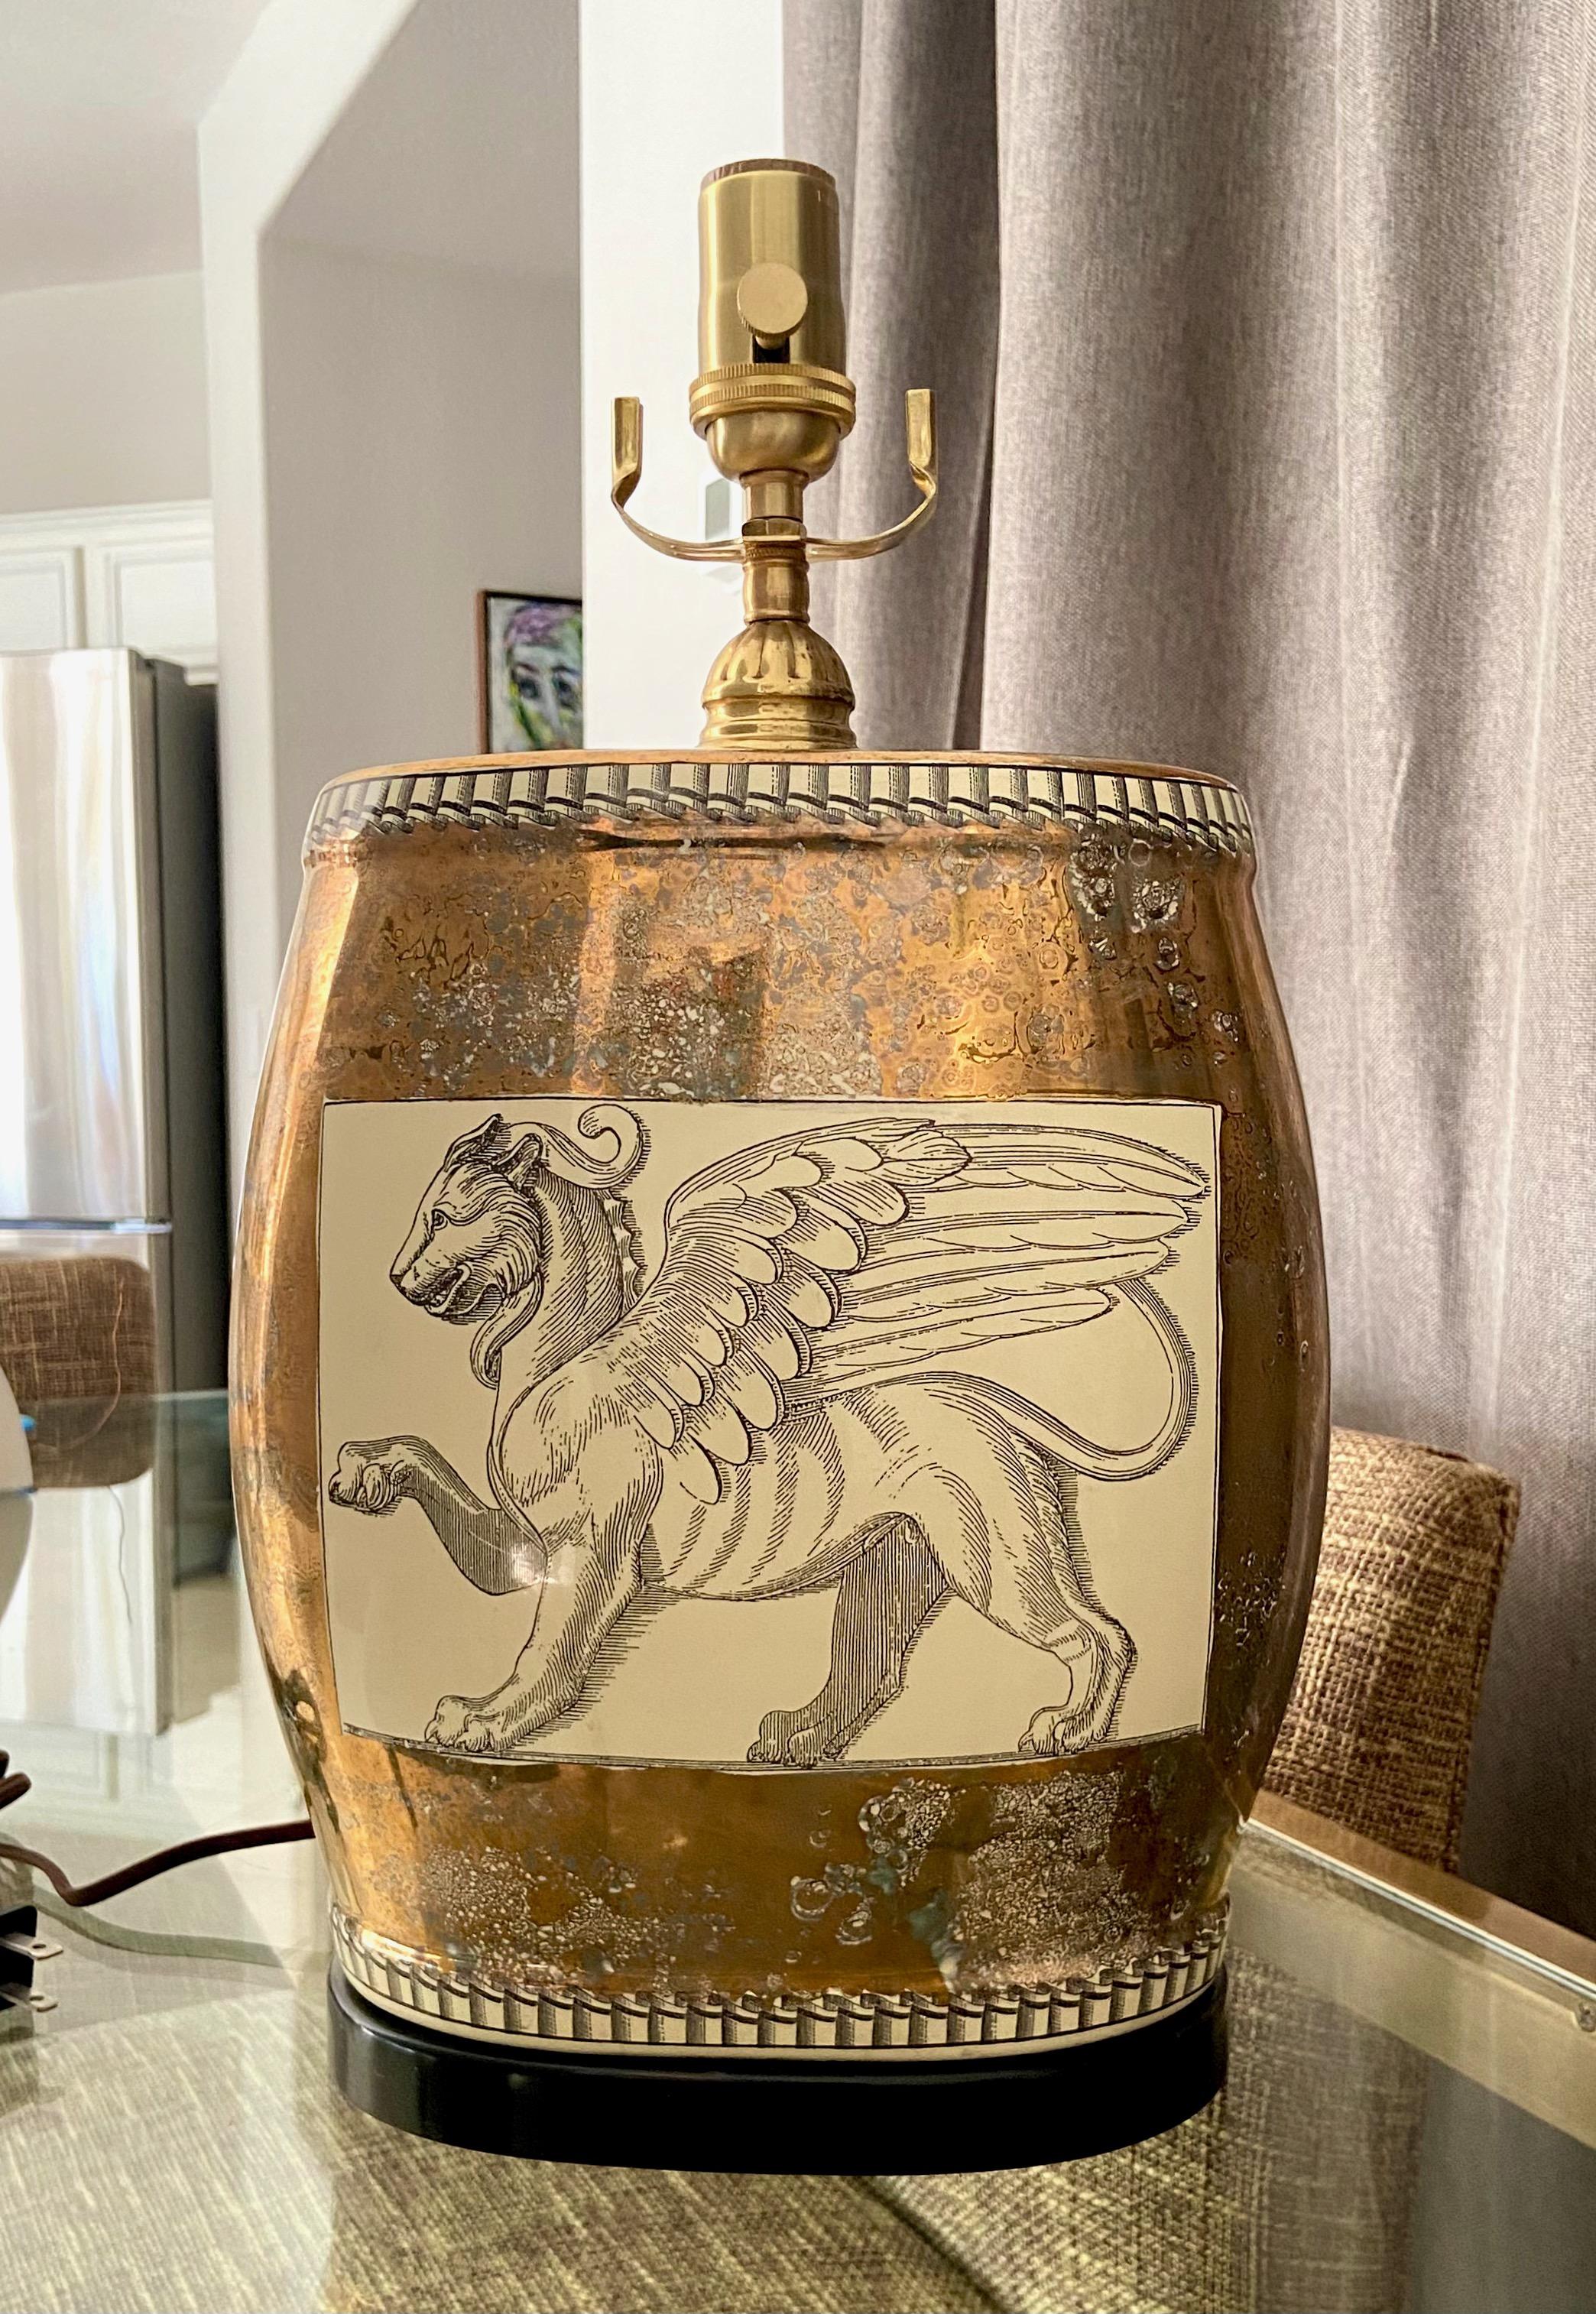 Single porcelain oval shape table lamp with Griffin Lion motif. The porcelain coloring consists black outlining of the Griffins against taupe background (front and back) surrounded by copper and black mottled mirror like finish. Lamp rest on black